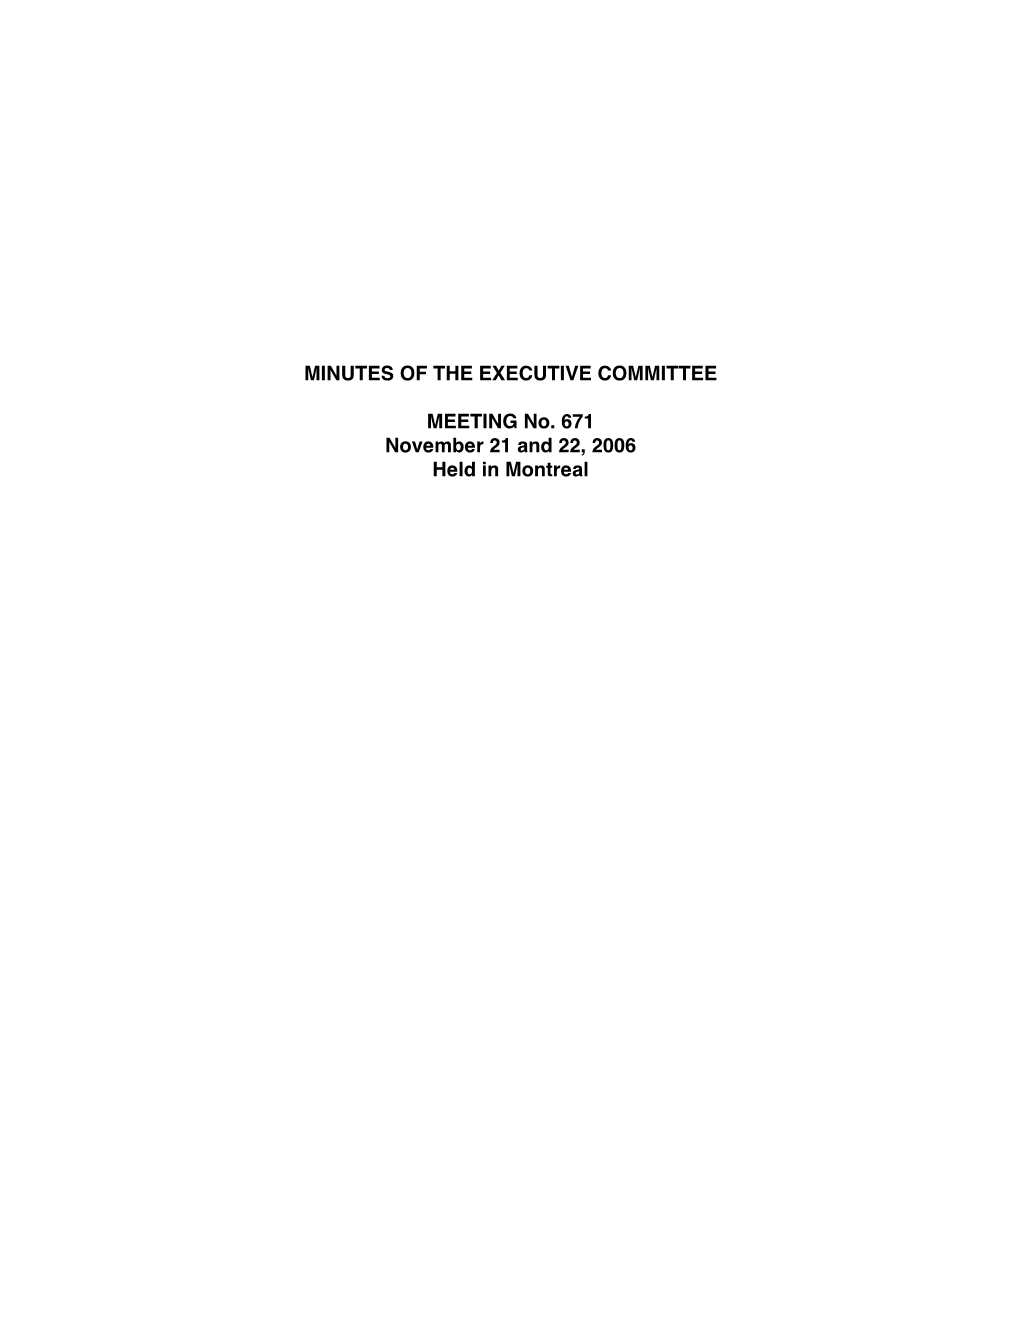 MINUTES of the EXECUTIVE COMMITTEE MEETING No. 671